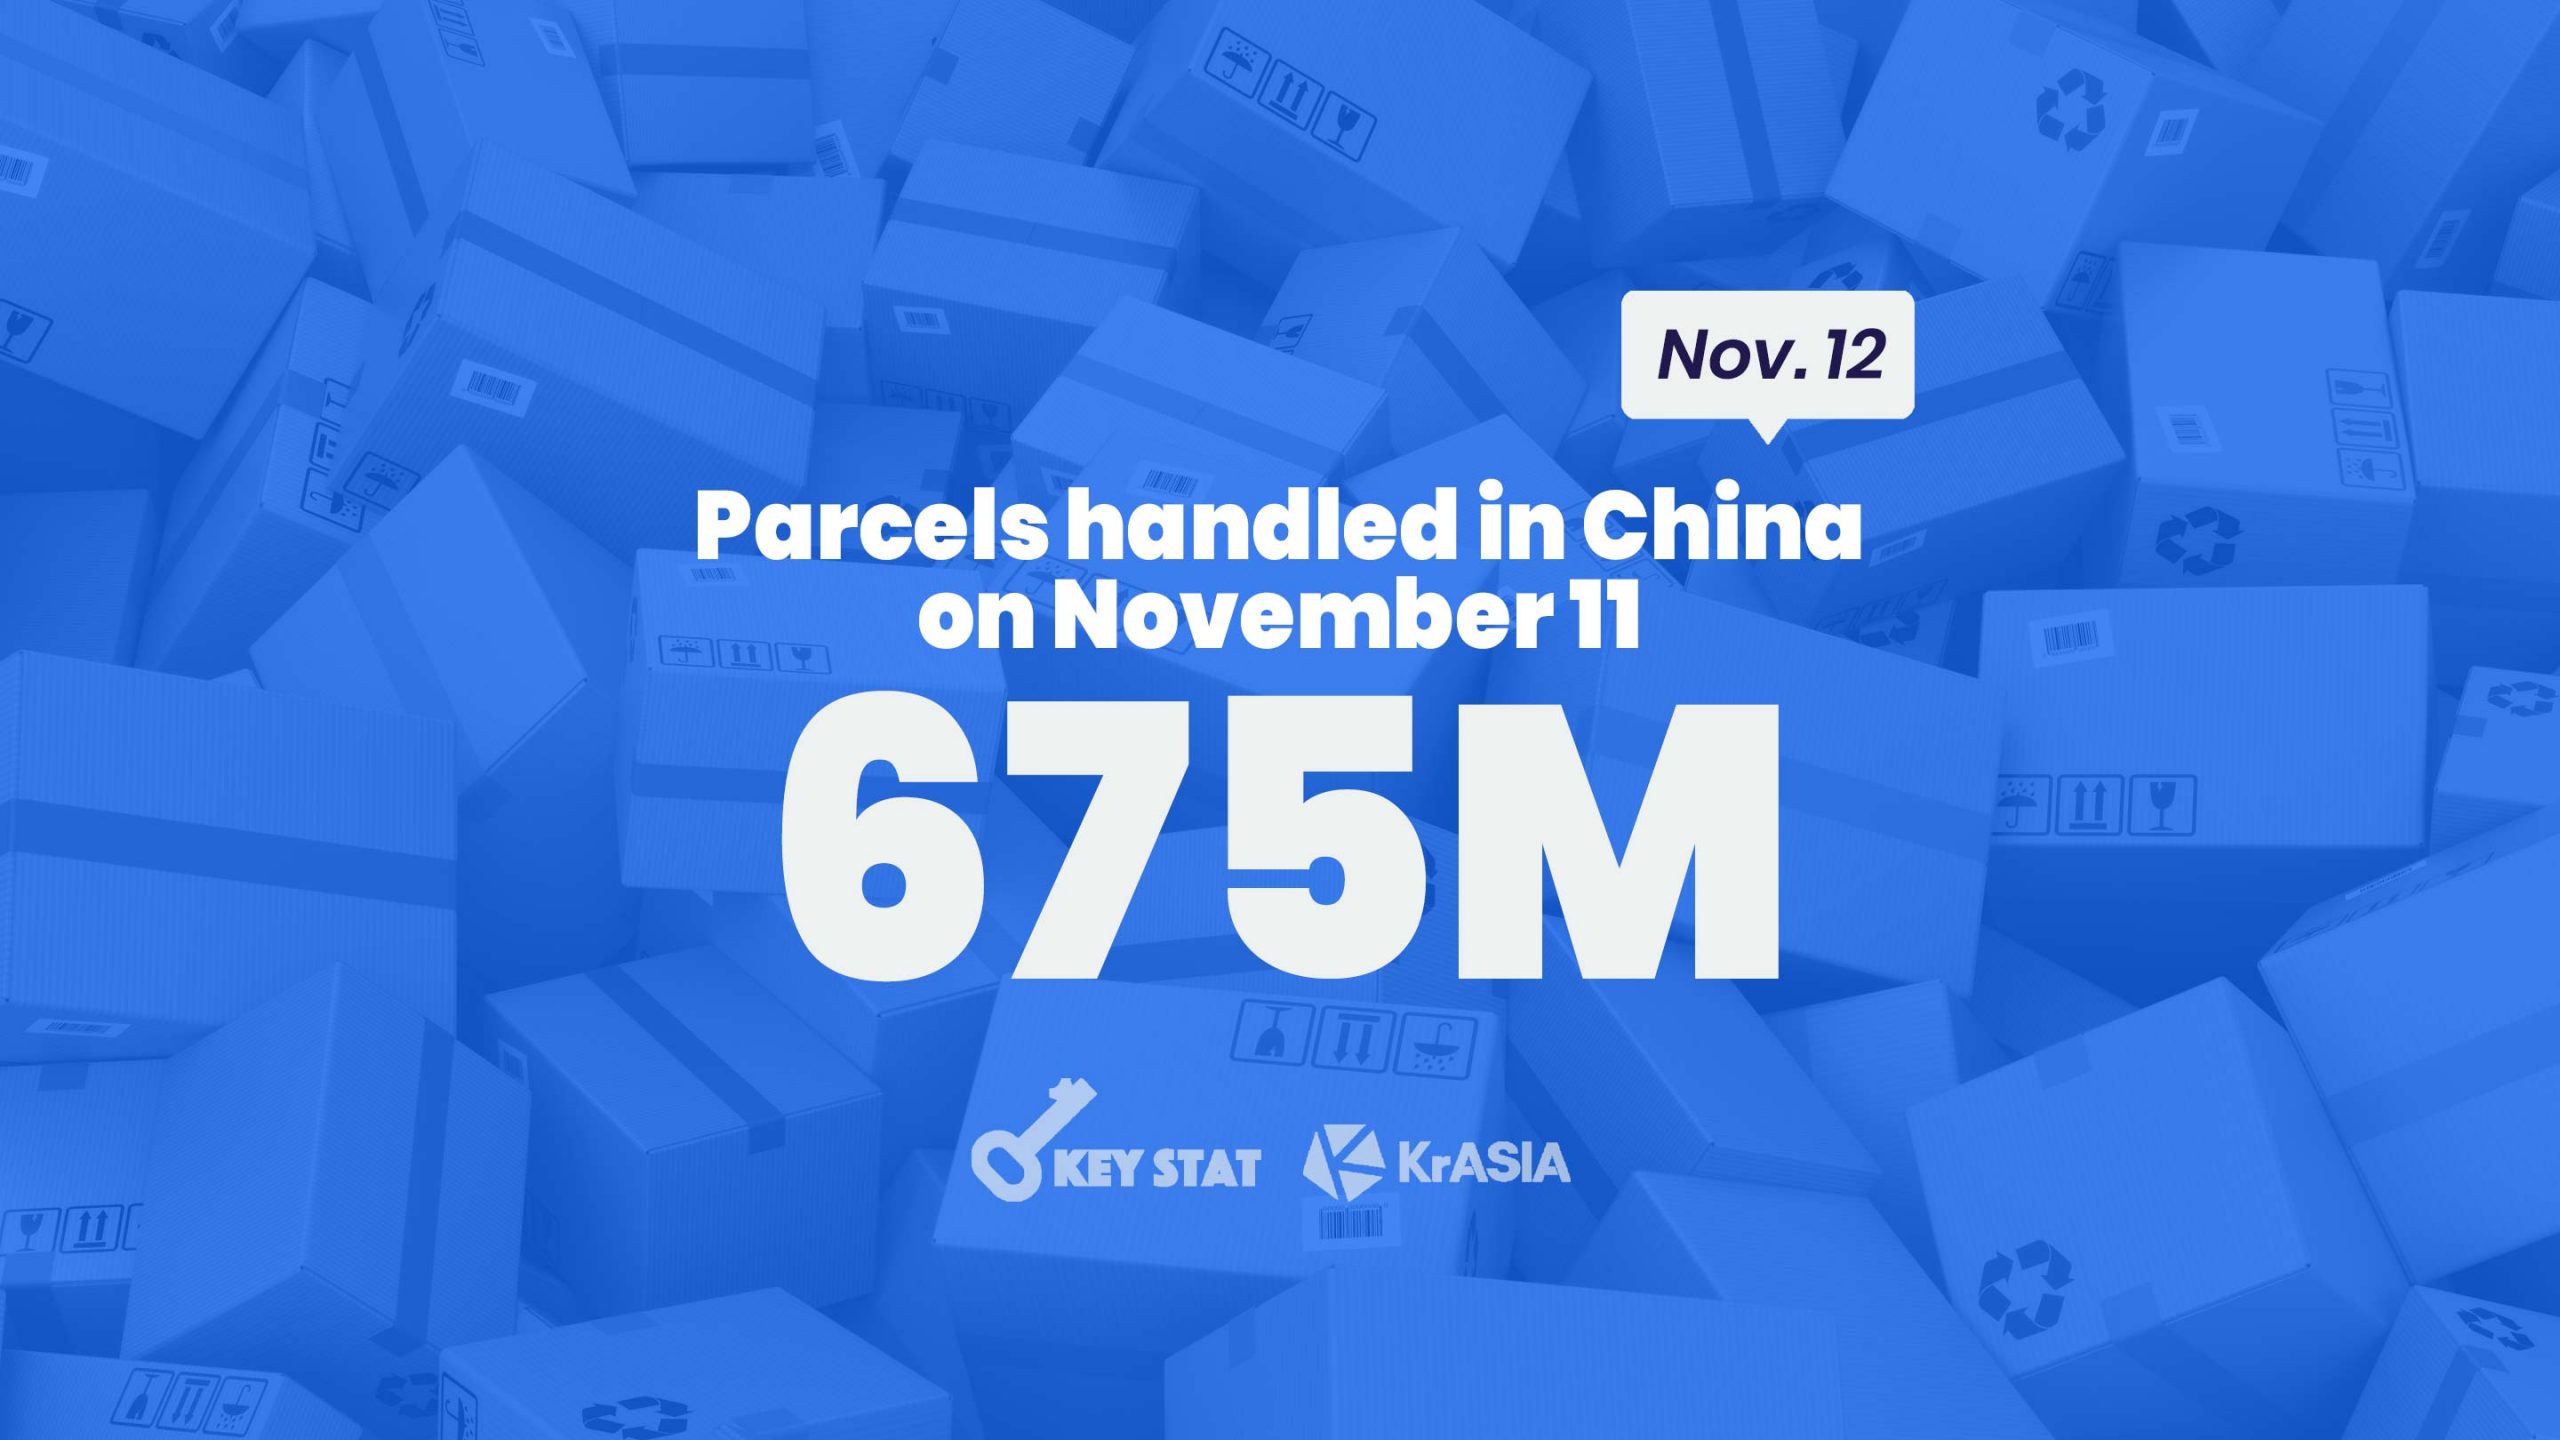 KEY STAT | China couriers handling 26% more parcels during this year’s shopping festival